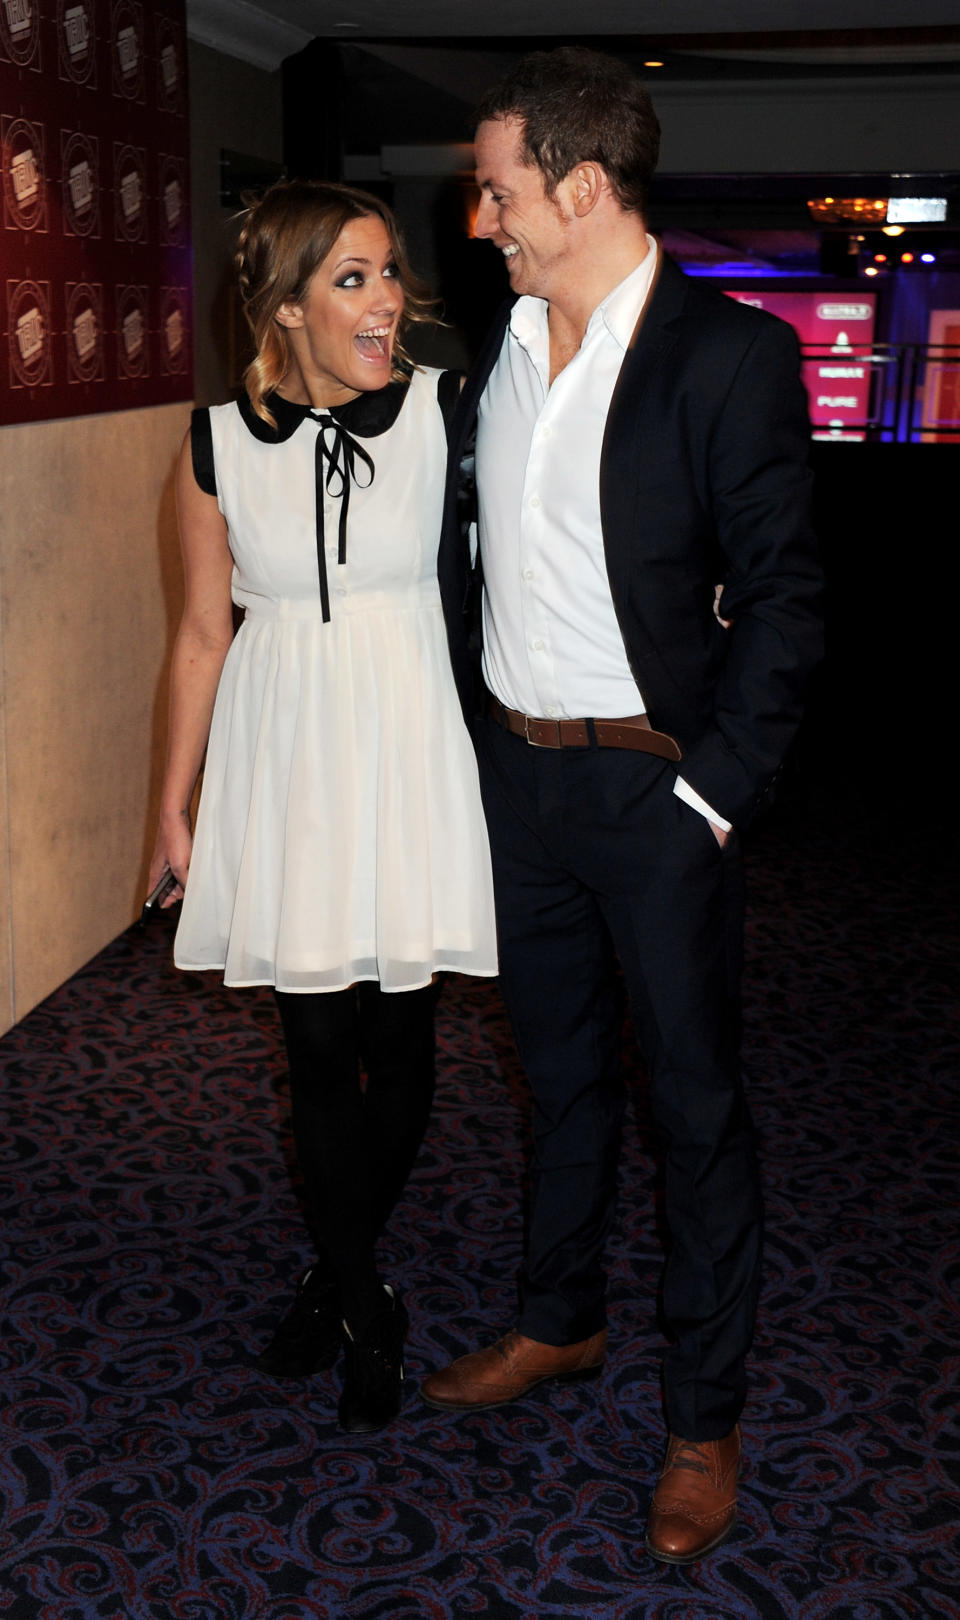 LONDON, ENGLAND - MARCH 08:  (EMBARGOED FOR PUBLICATION IN UK TABLOID NEWSPAPERS UNTIL 48 HOURS AFTER CREATE DATE AND TIME. MANDATORY CREDIT PHOTO BY DAVE M. BENETT/GETTY IMAGES REQUIRED) Presenter Caroline Flack (L) and actor Joe Swash attend the TRIC Television and Radio Industries Club Awards at Grosvenor House on March 8, 2011 in London, England.  (Photo by Dave M. Benett/Getty Images)